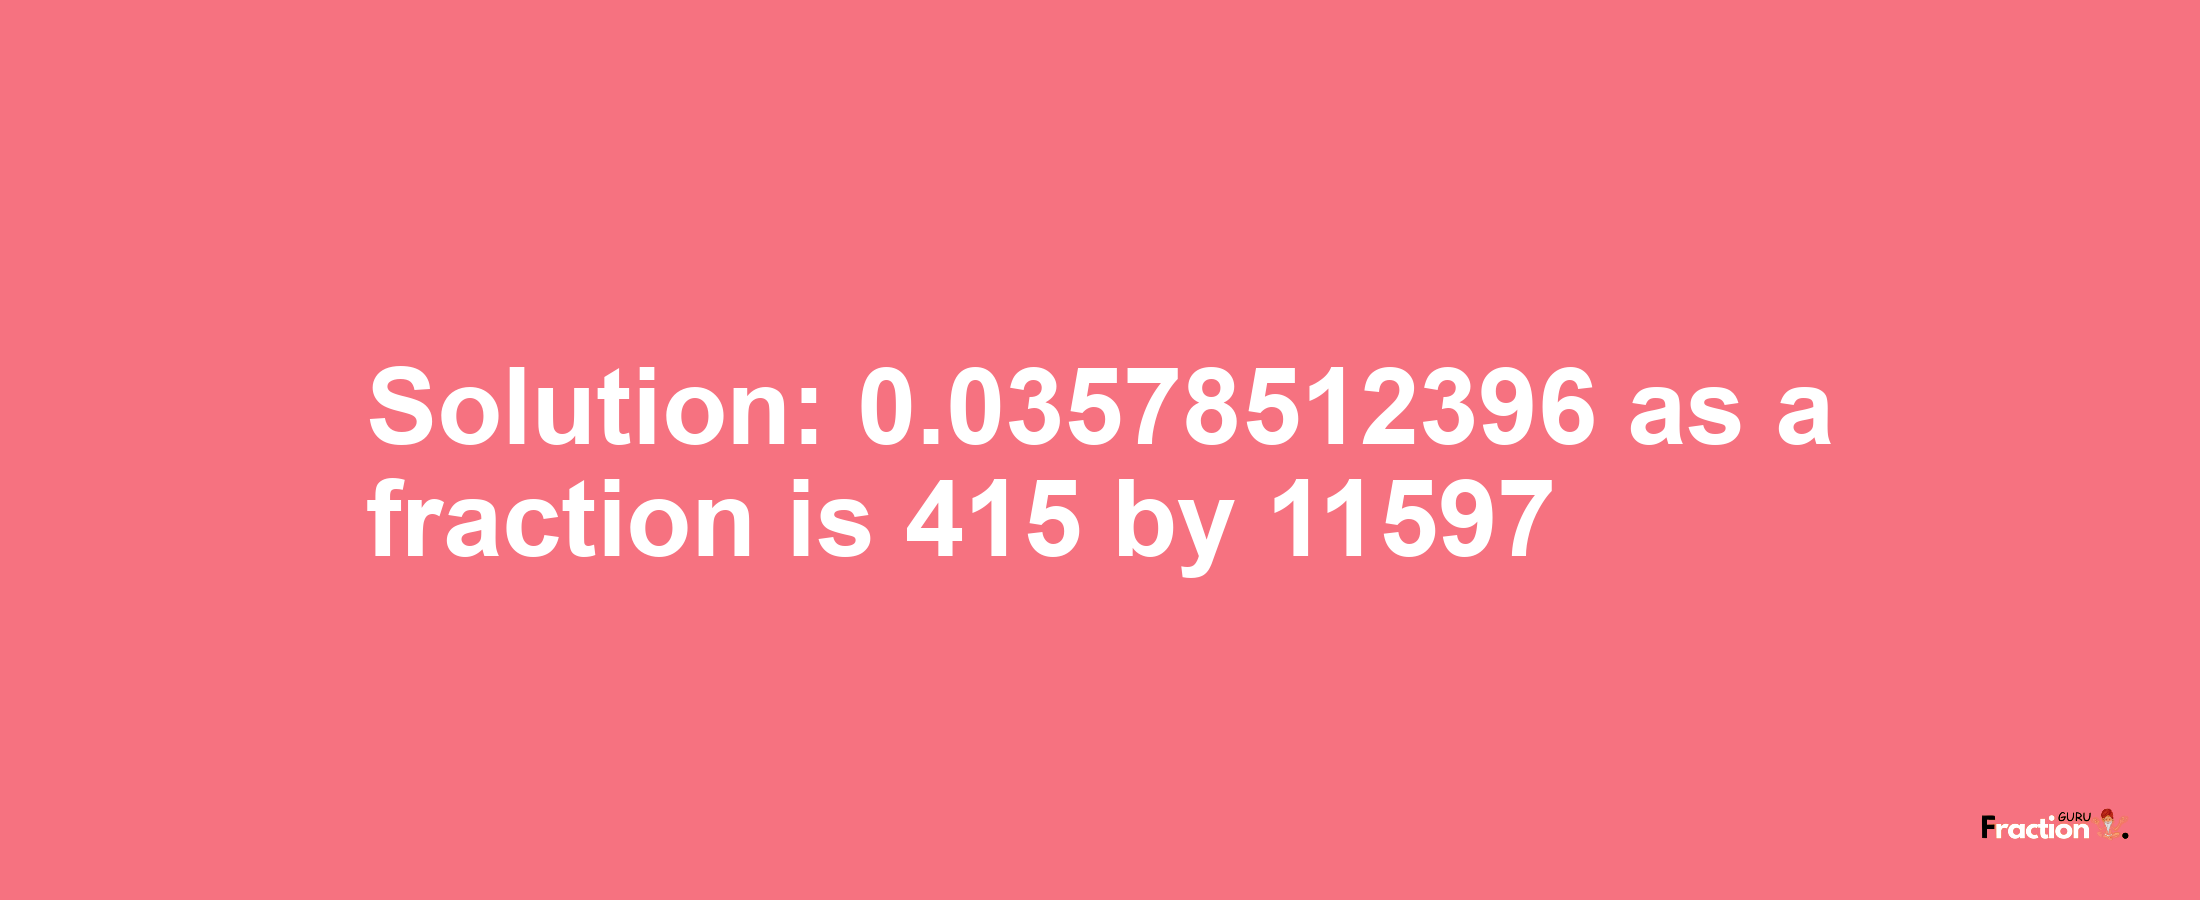 Solution:0.03578512396 as a fraction is 415/11597